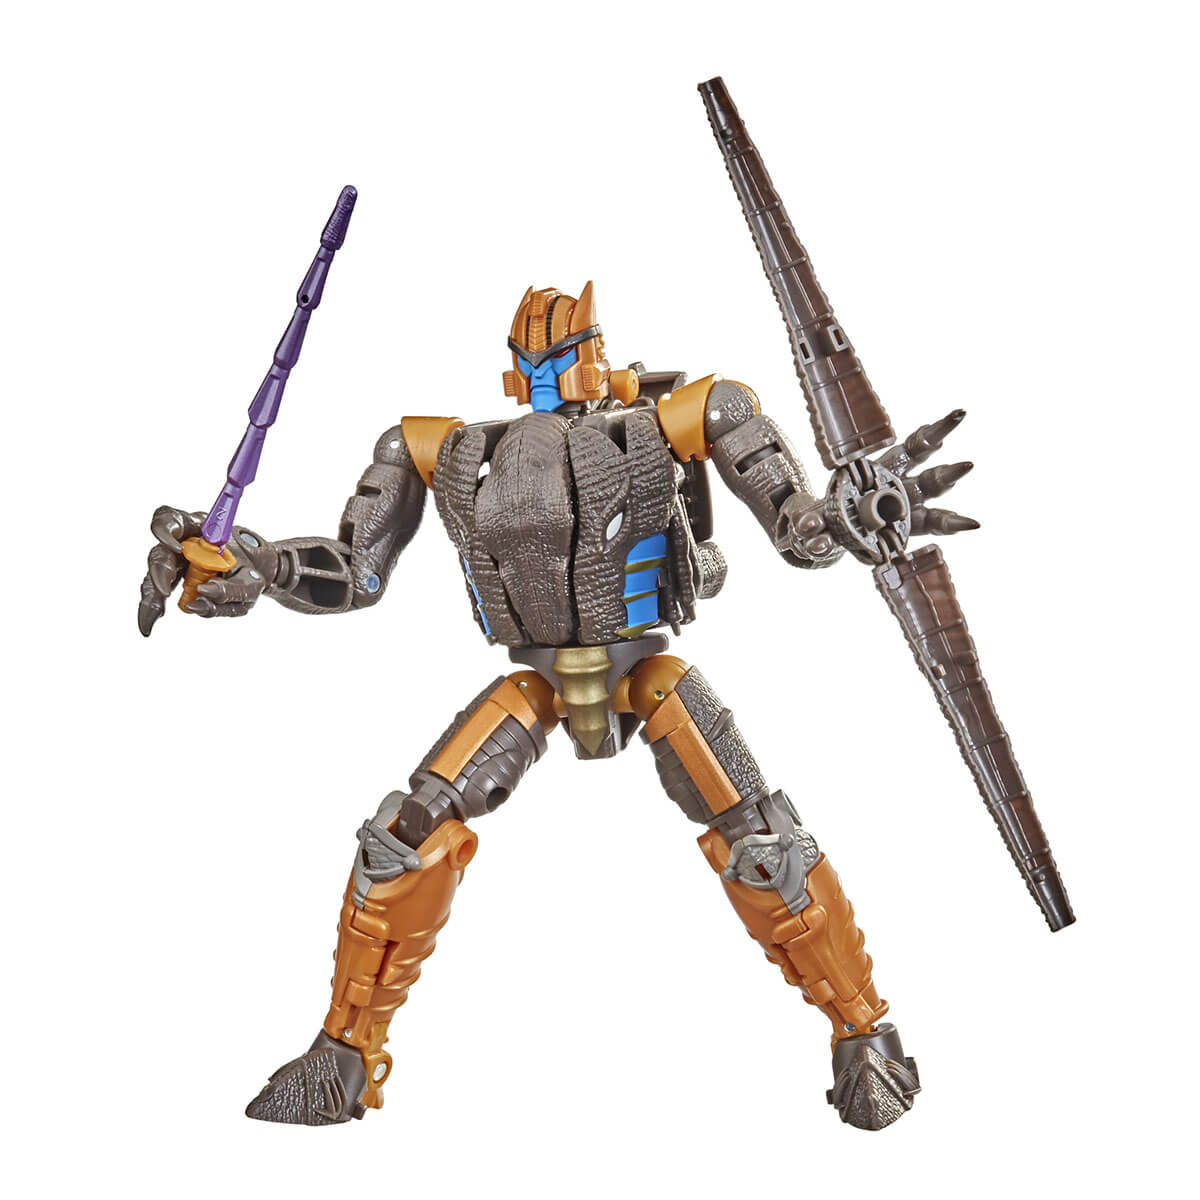 Transformers Voyager Class Dinobot Collectible Action Figure